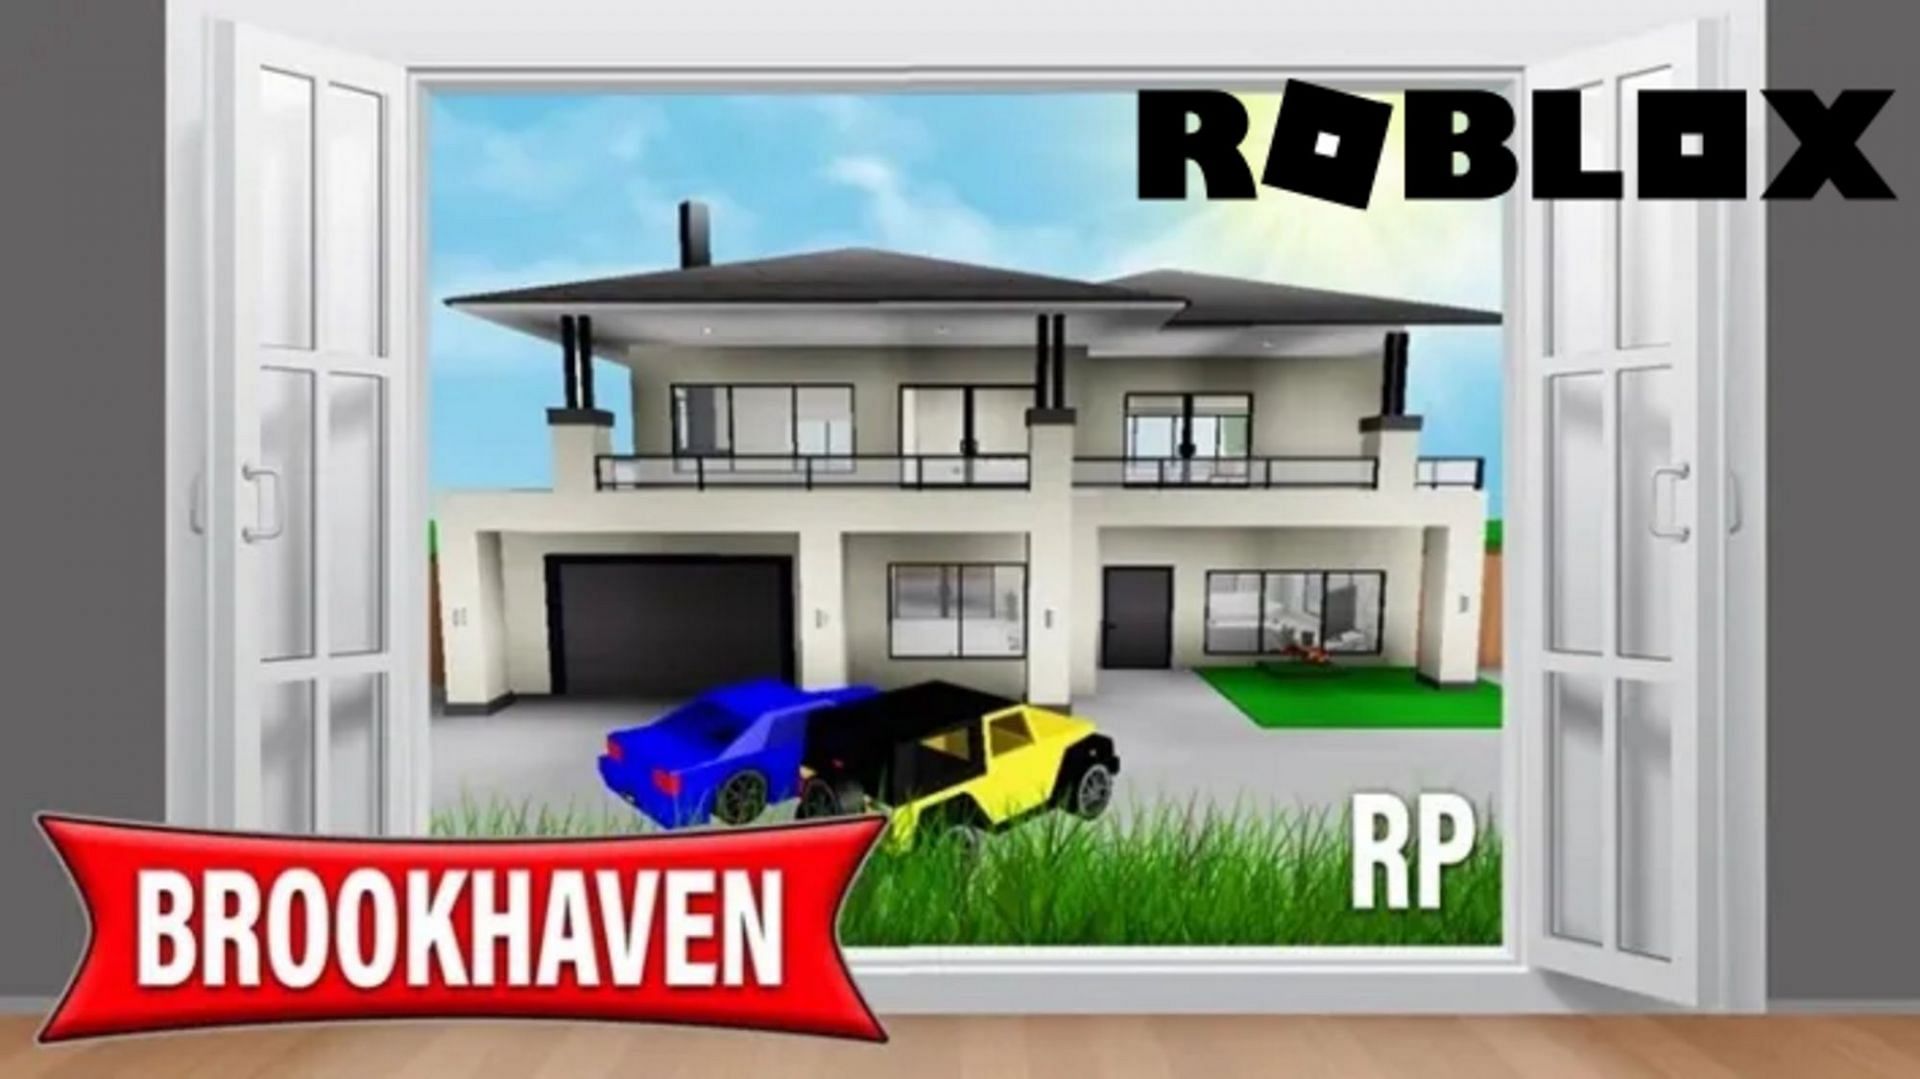 A look at some of the best vehicles in Roblox Brookhaven RP (Image via Roblox)